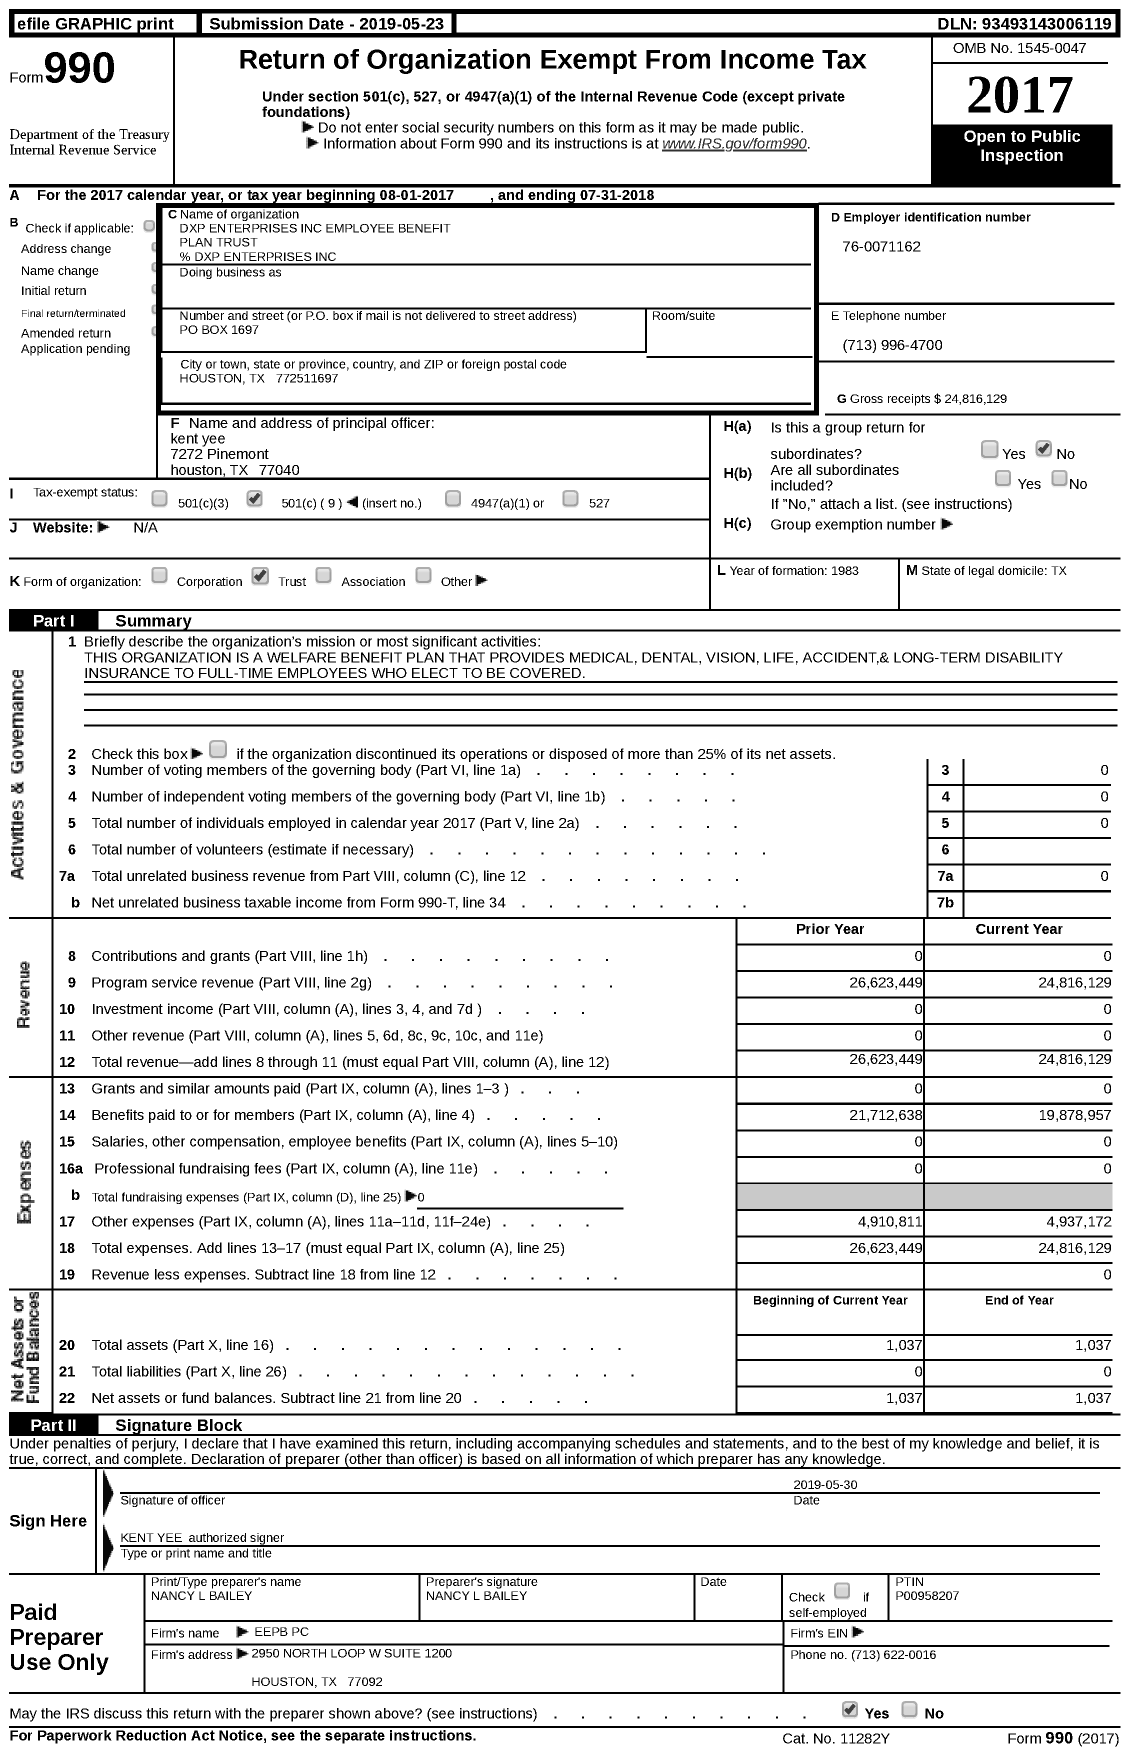 Image of first page of 2017 Form 990 for DXP Enterprises Inc Employee Benefit Plan